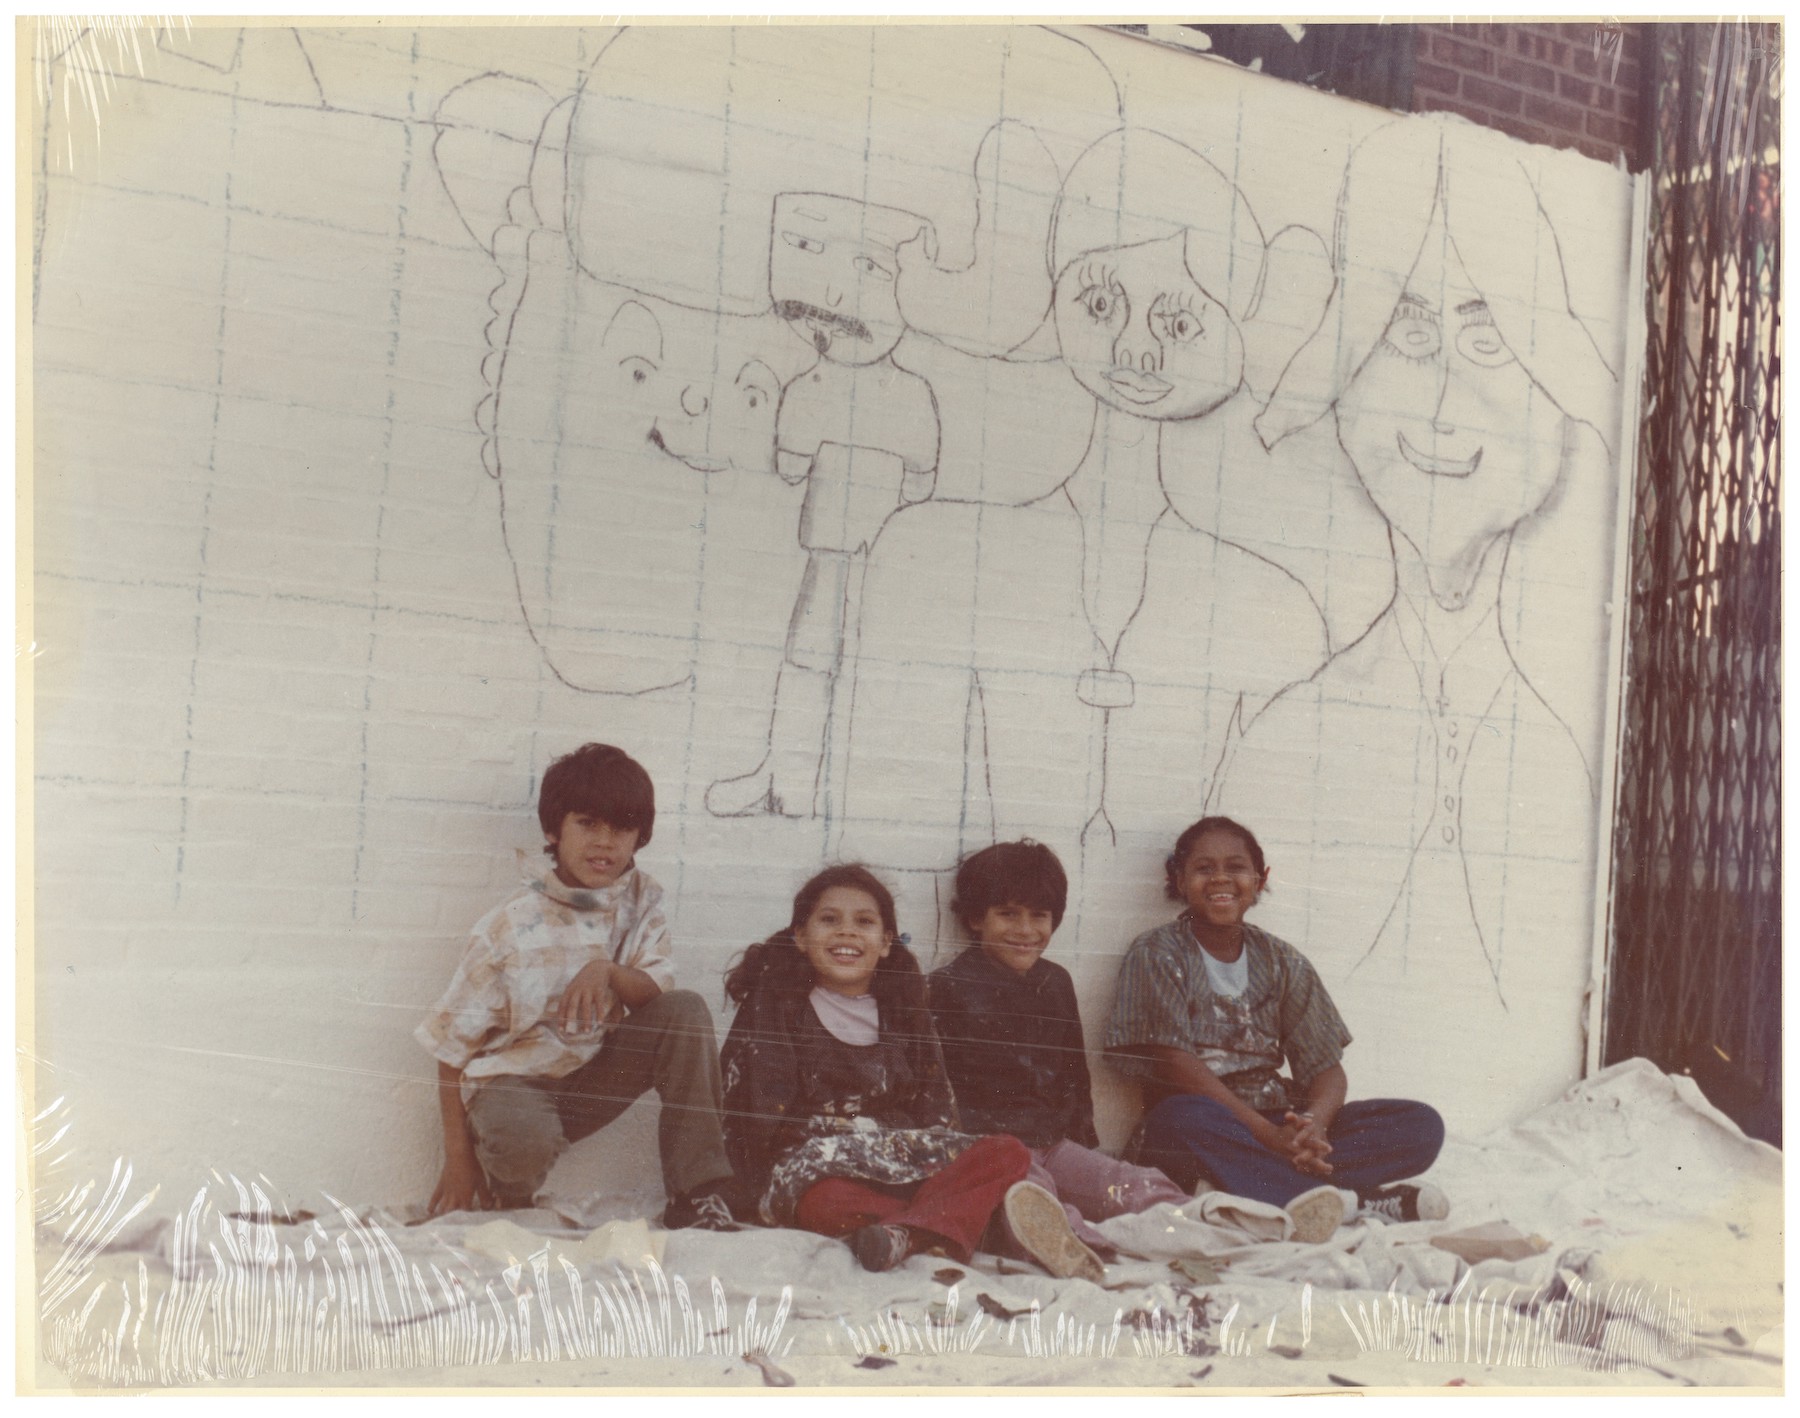 New Project! Street Scene: CETA Murals, New Haven, and the Late 1970s